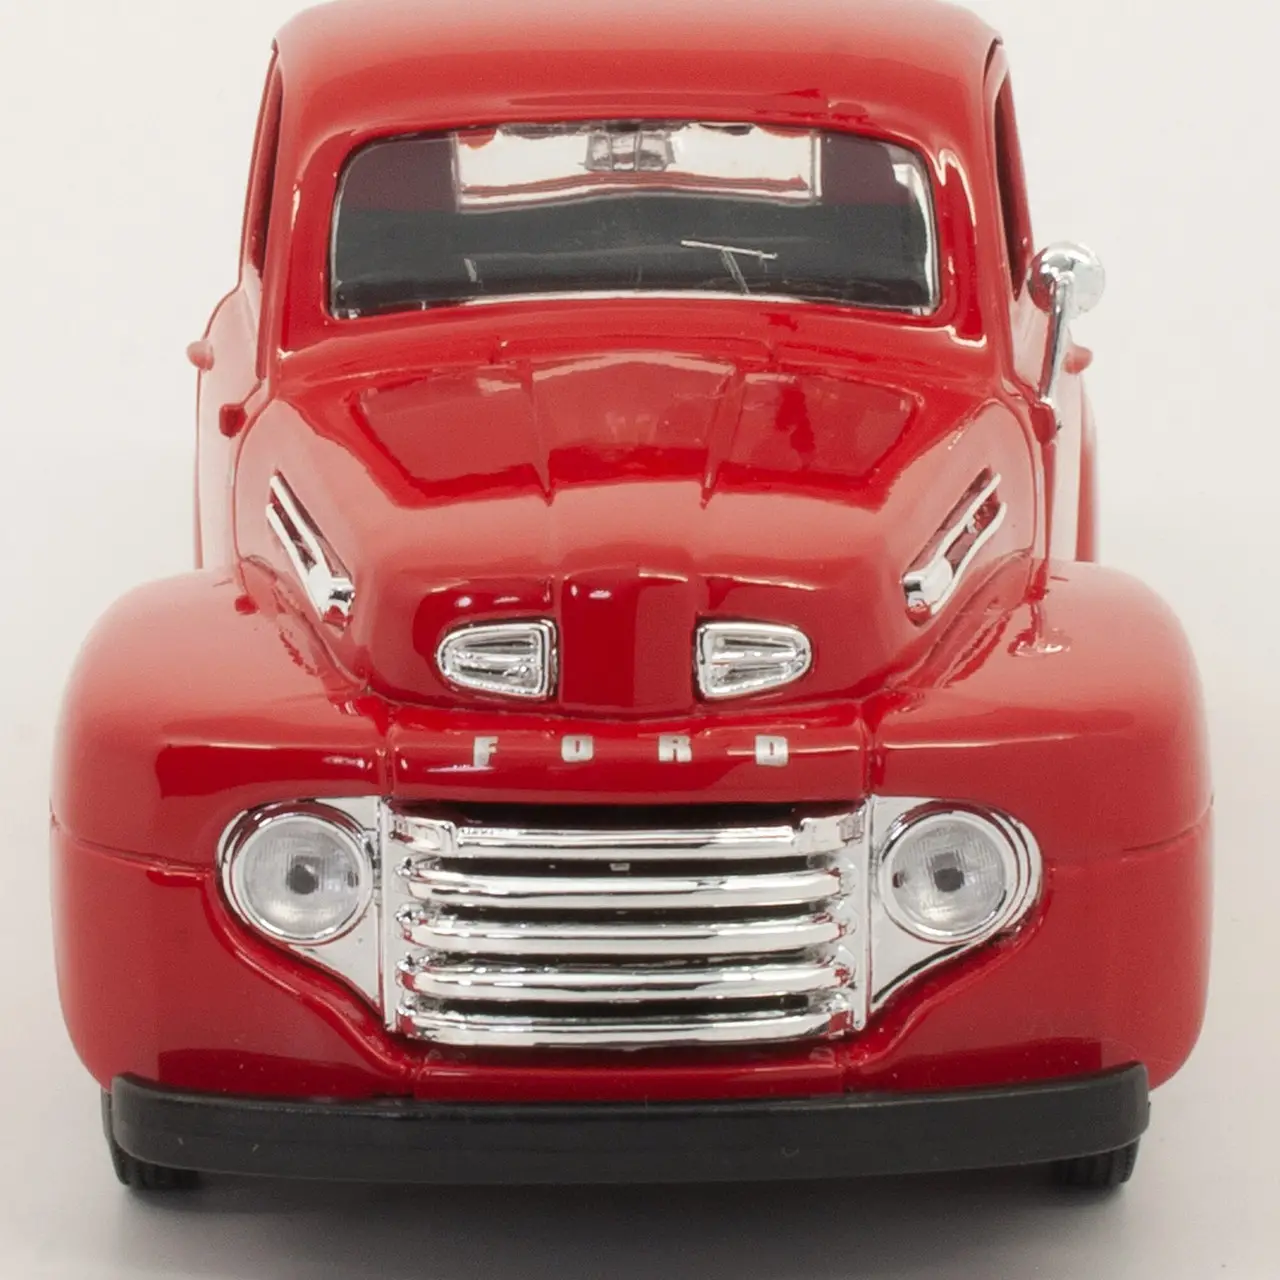 The History of the 1948 Ford F100 From Classic to Iconic